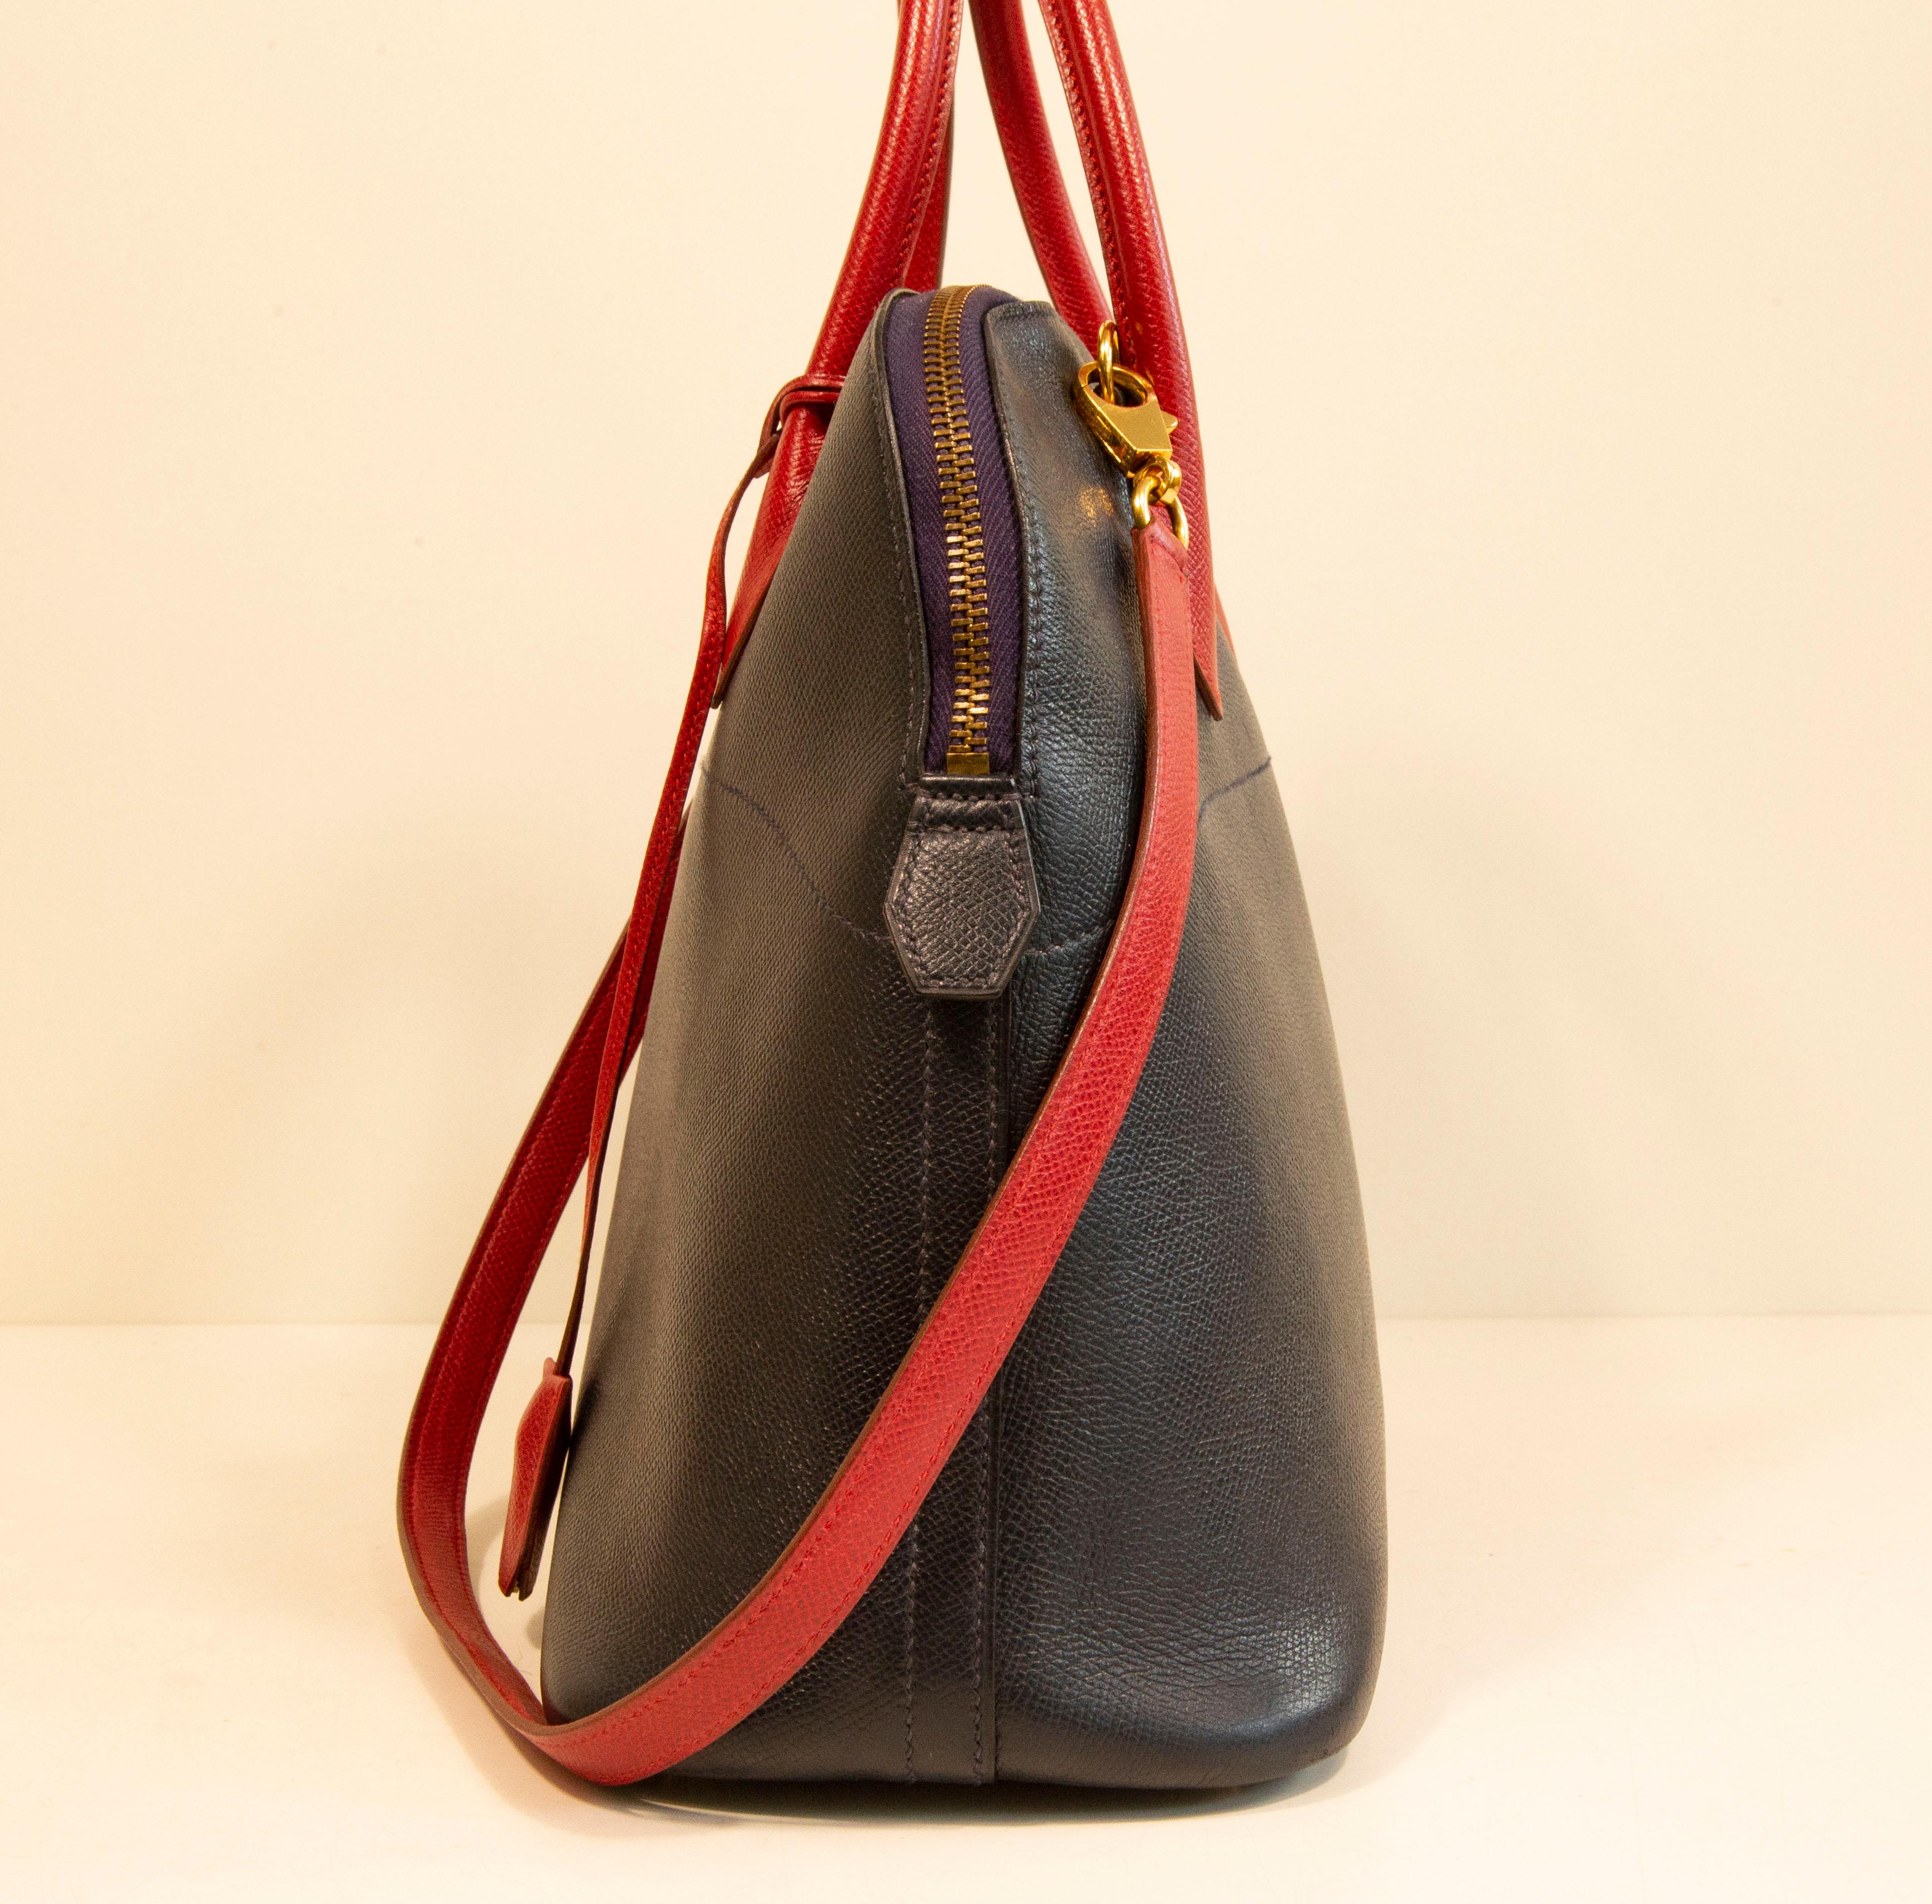 Women's 1990s Hermes Bolide 35 Bag in Navy Blue and Red Leather For Sale